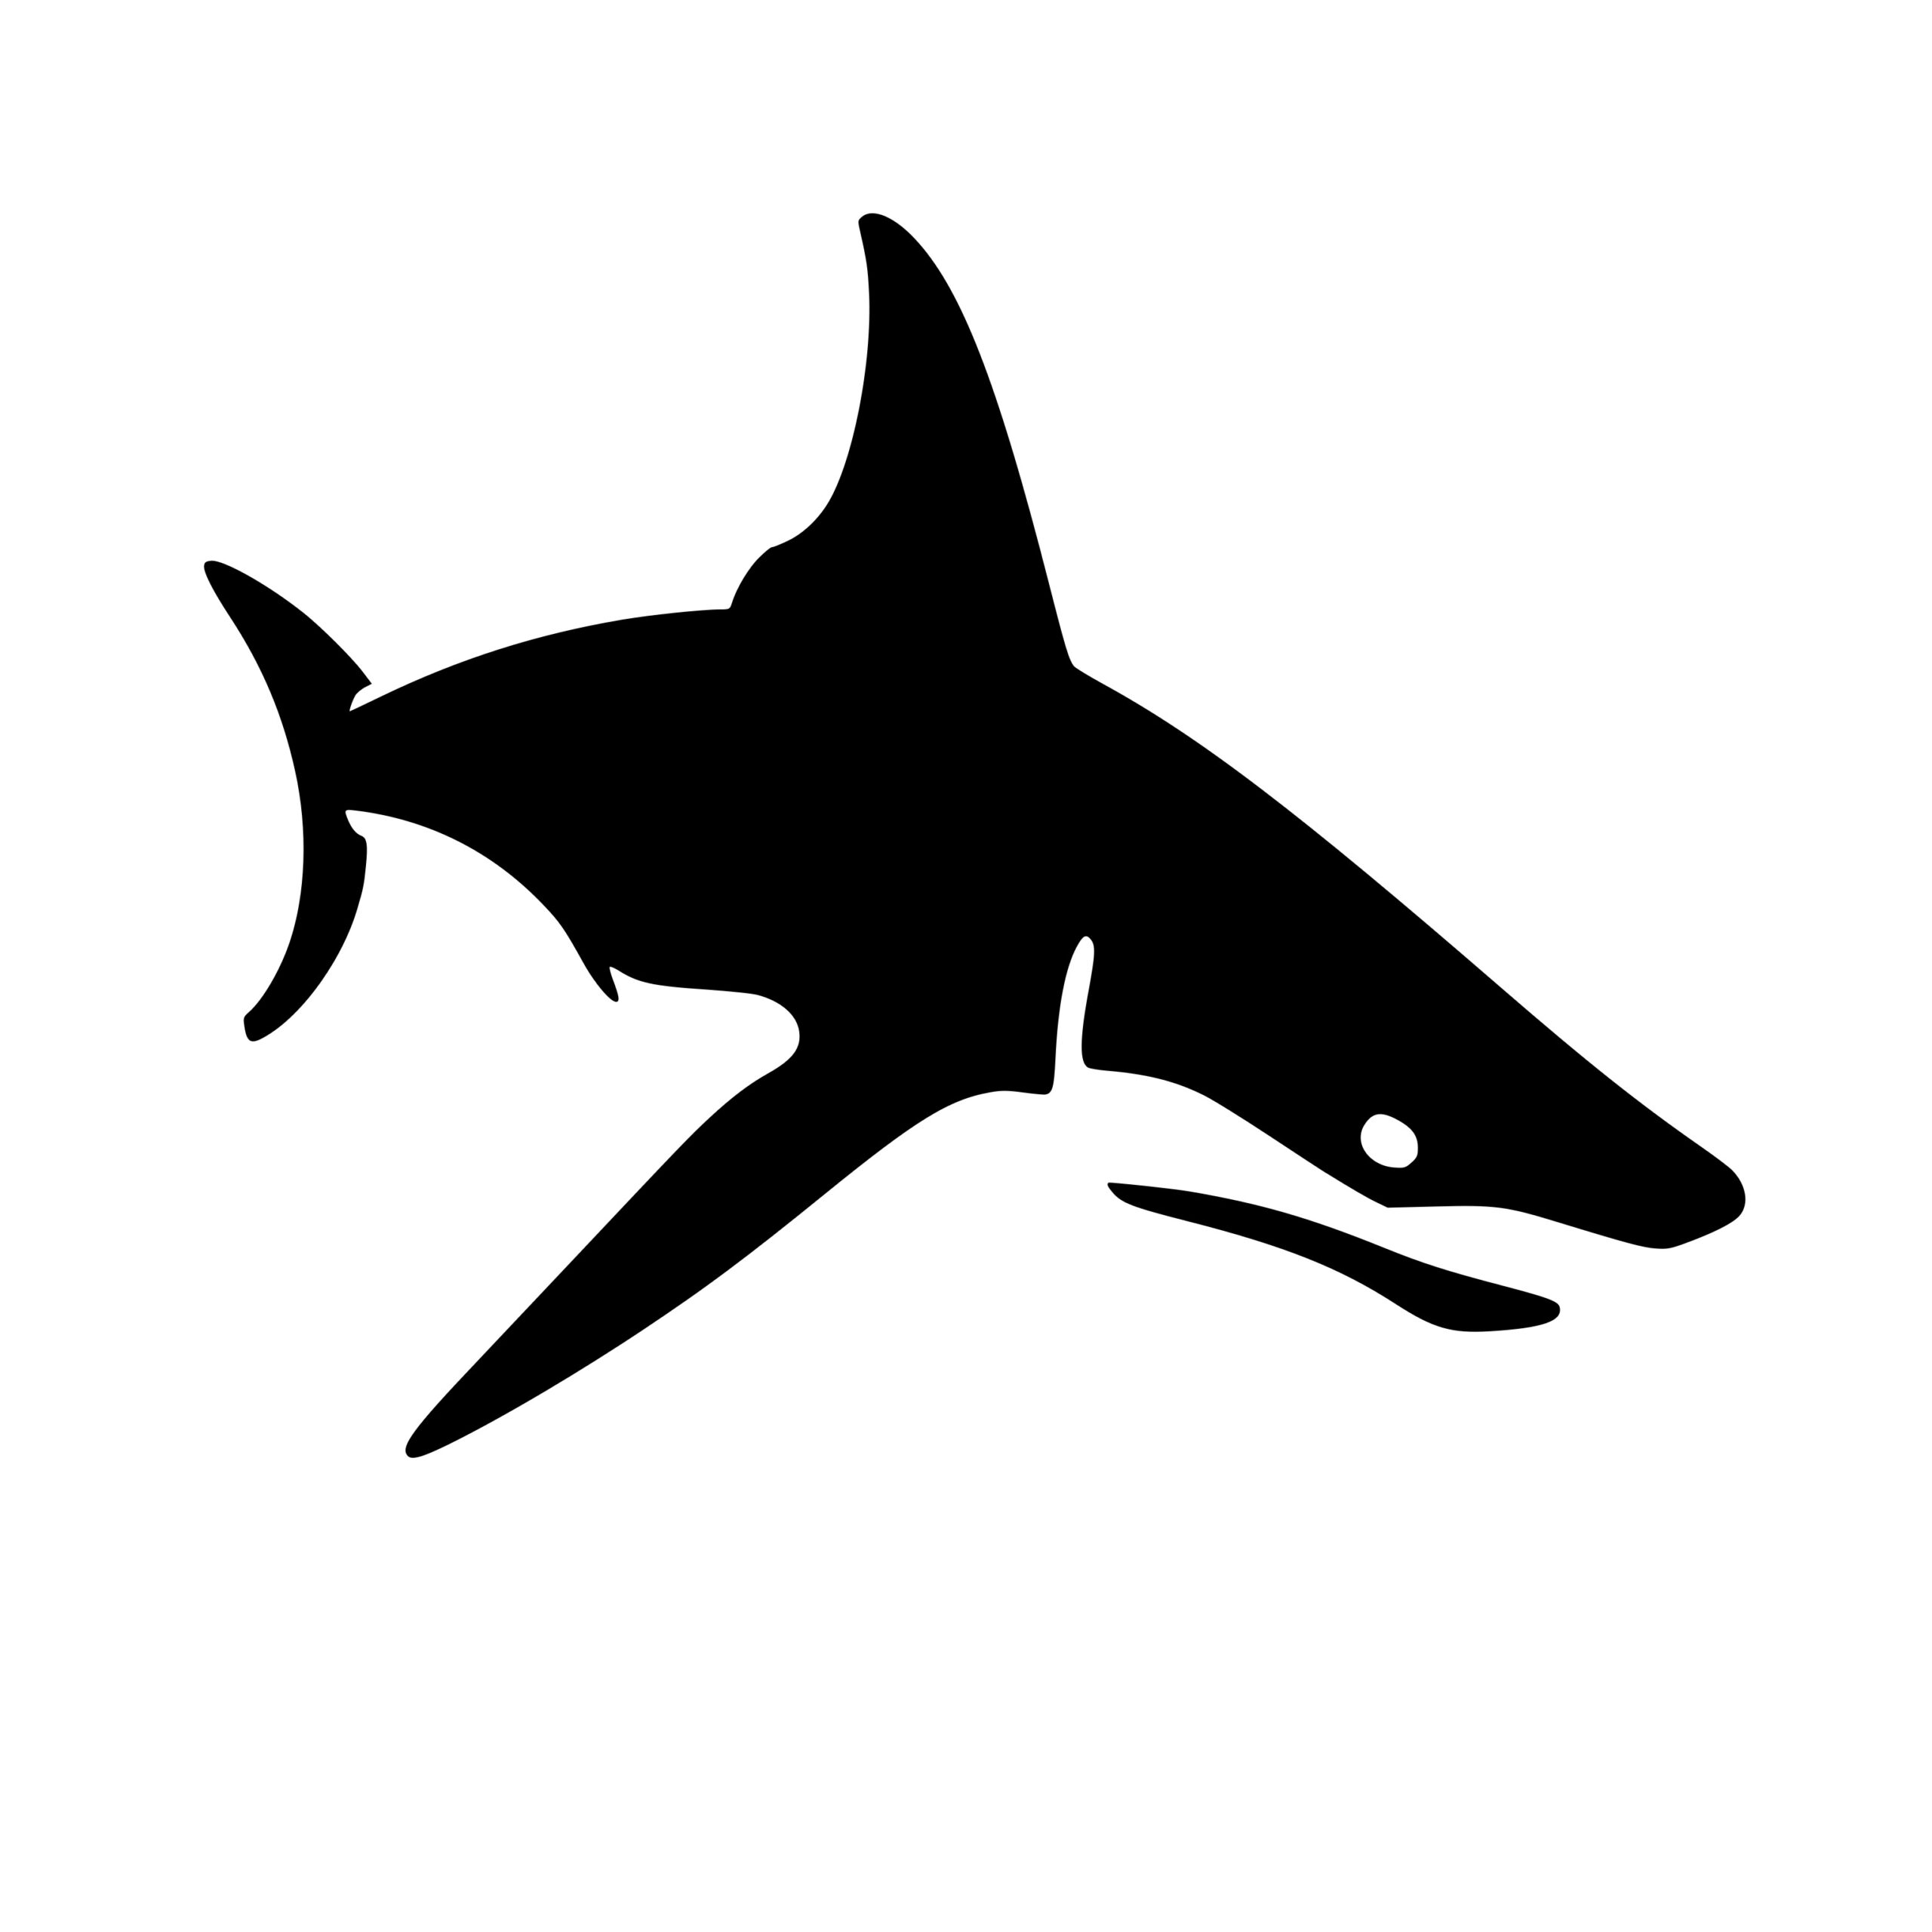 Instant Download: Hammerhead Shark SVG/PNG/DXF File for Cricut, Silhouette